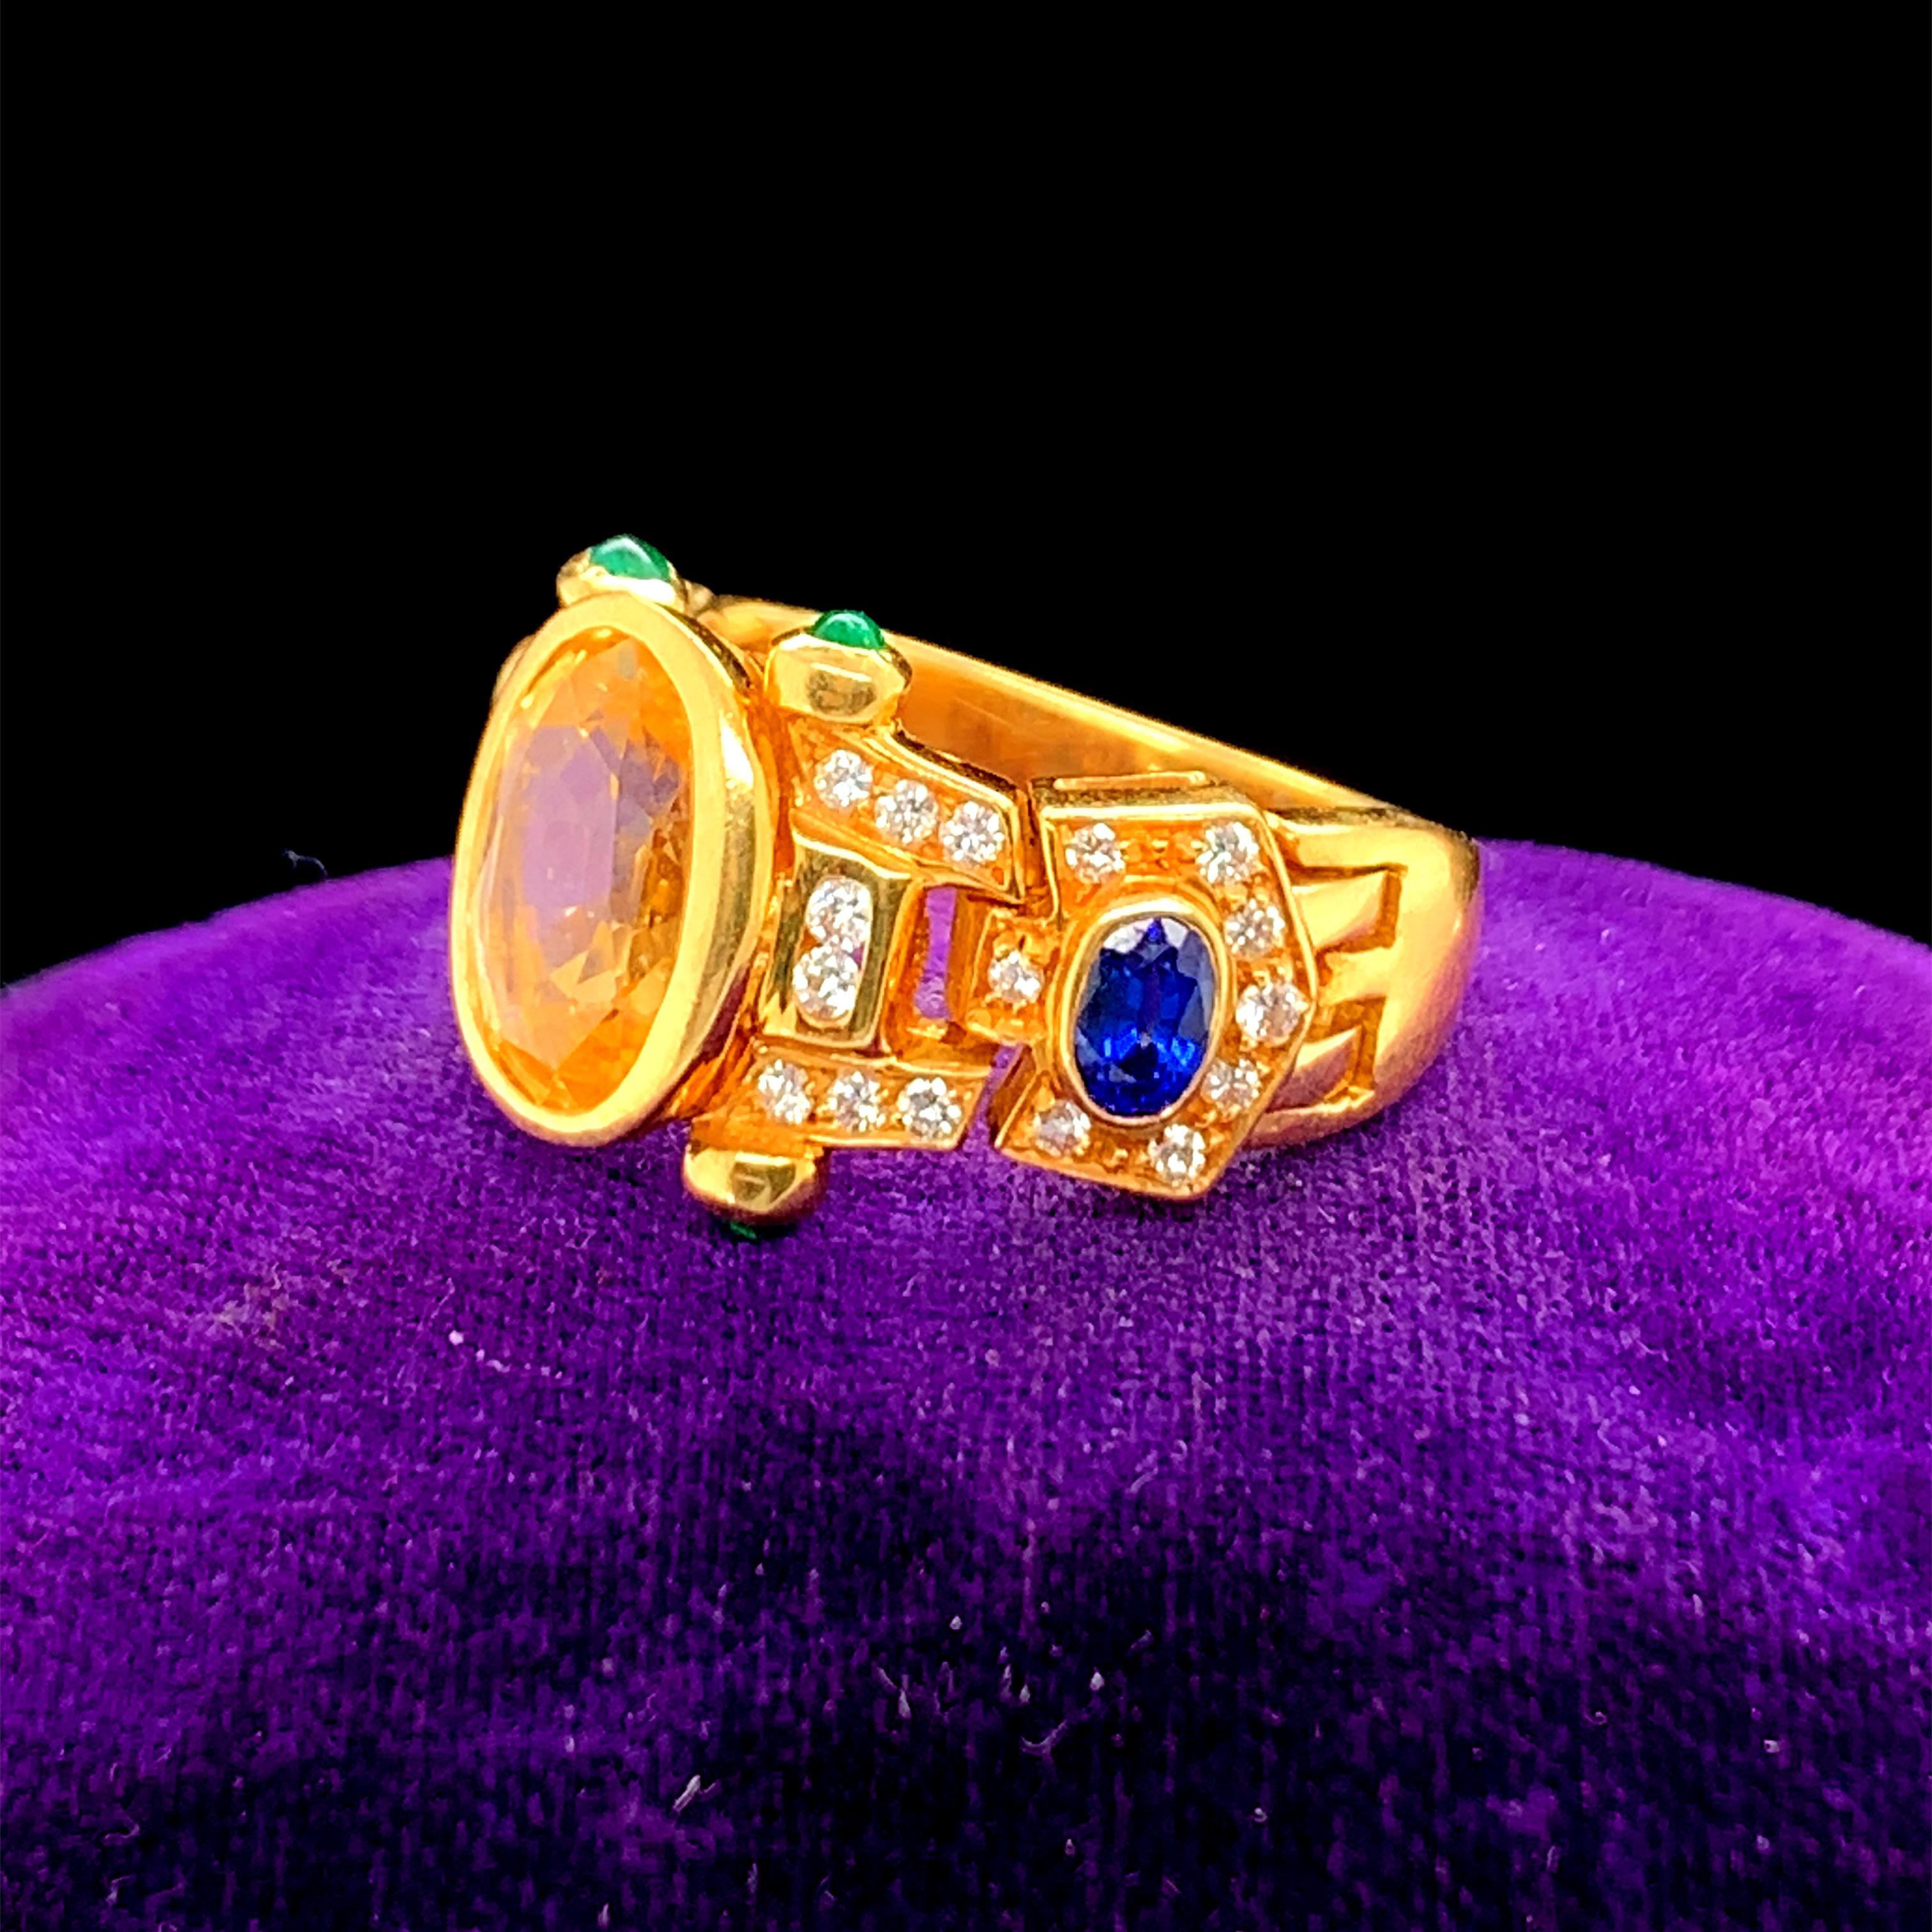 Year: 1990s

Item Details: 
Ring Size: 6.75
Metal Type: 18k Yellow Gold  [Hallmarked, and Tested]
Weight:  10.4 grams

Center Sapphire Details: 
Weight: 3.50ct, total weight
Cut: Antique Oval Cut
Color: Yellow
Type: Unheated, Untreated. Natural.